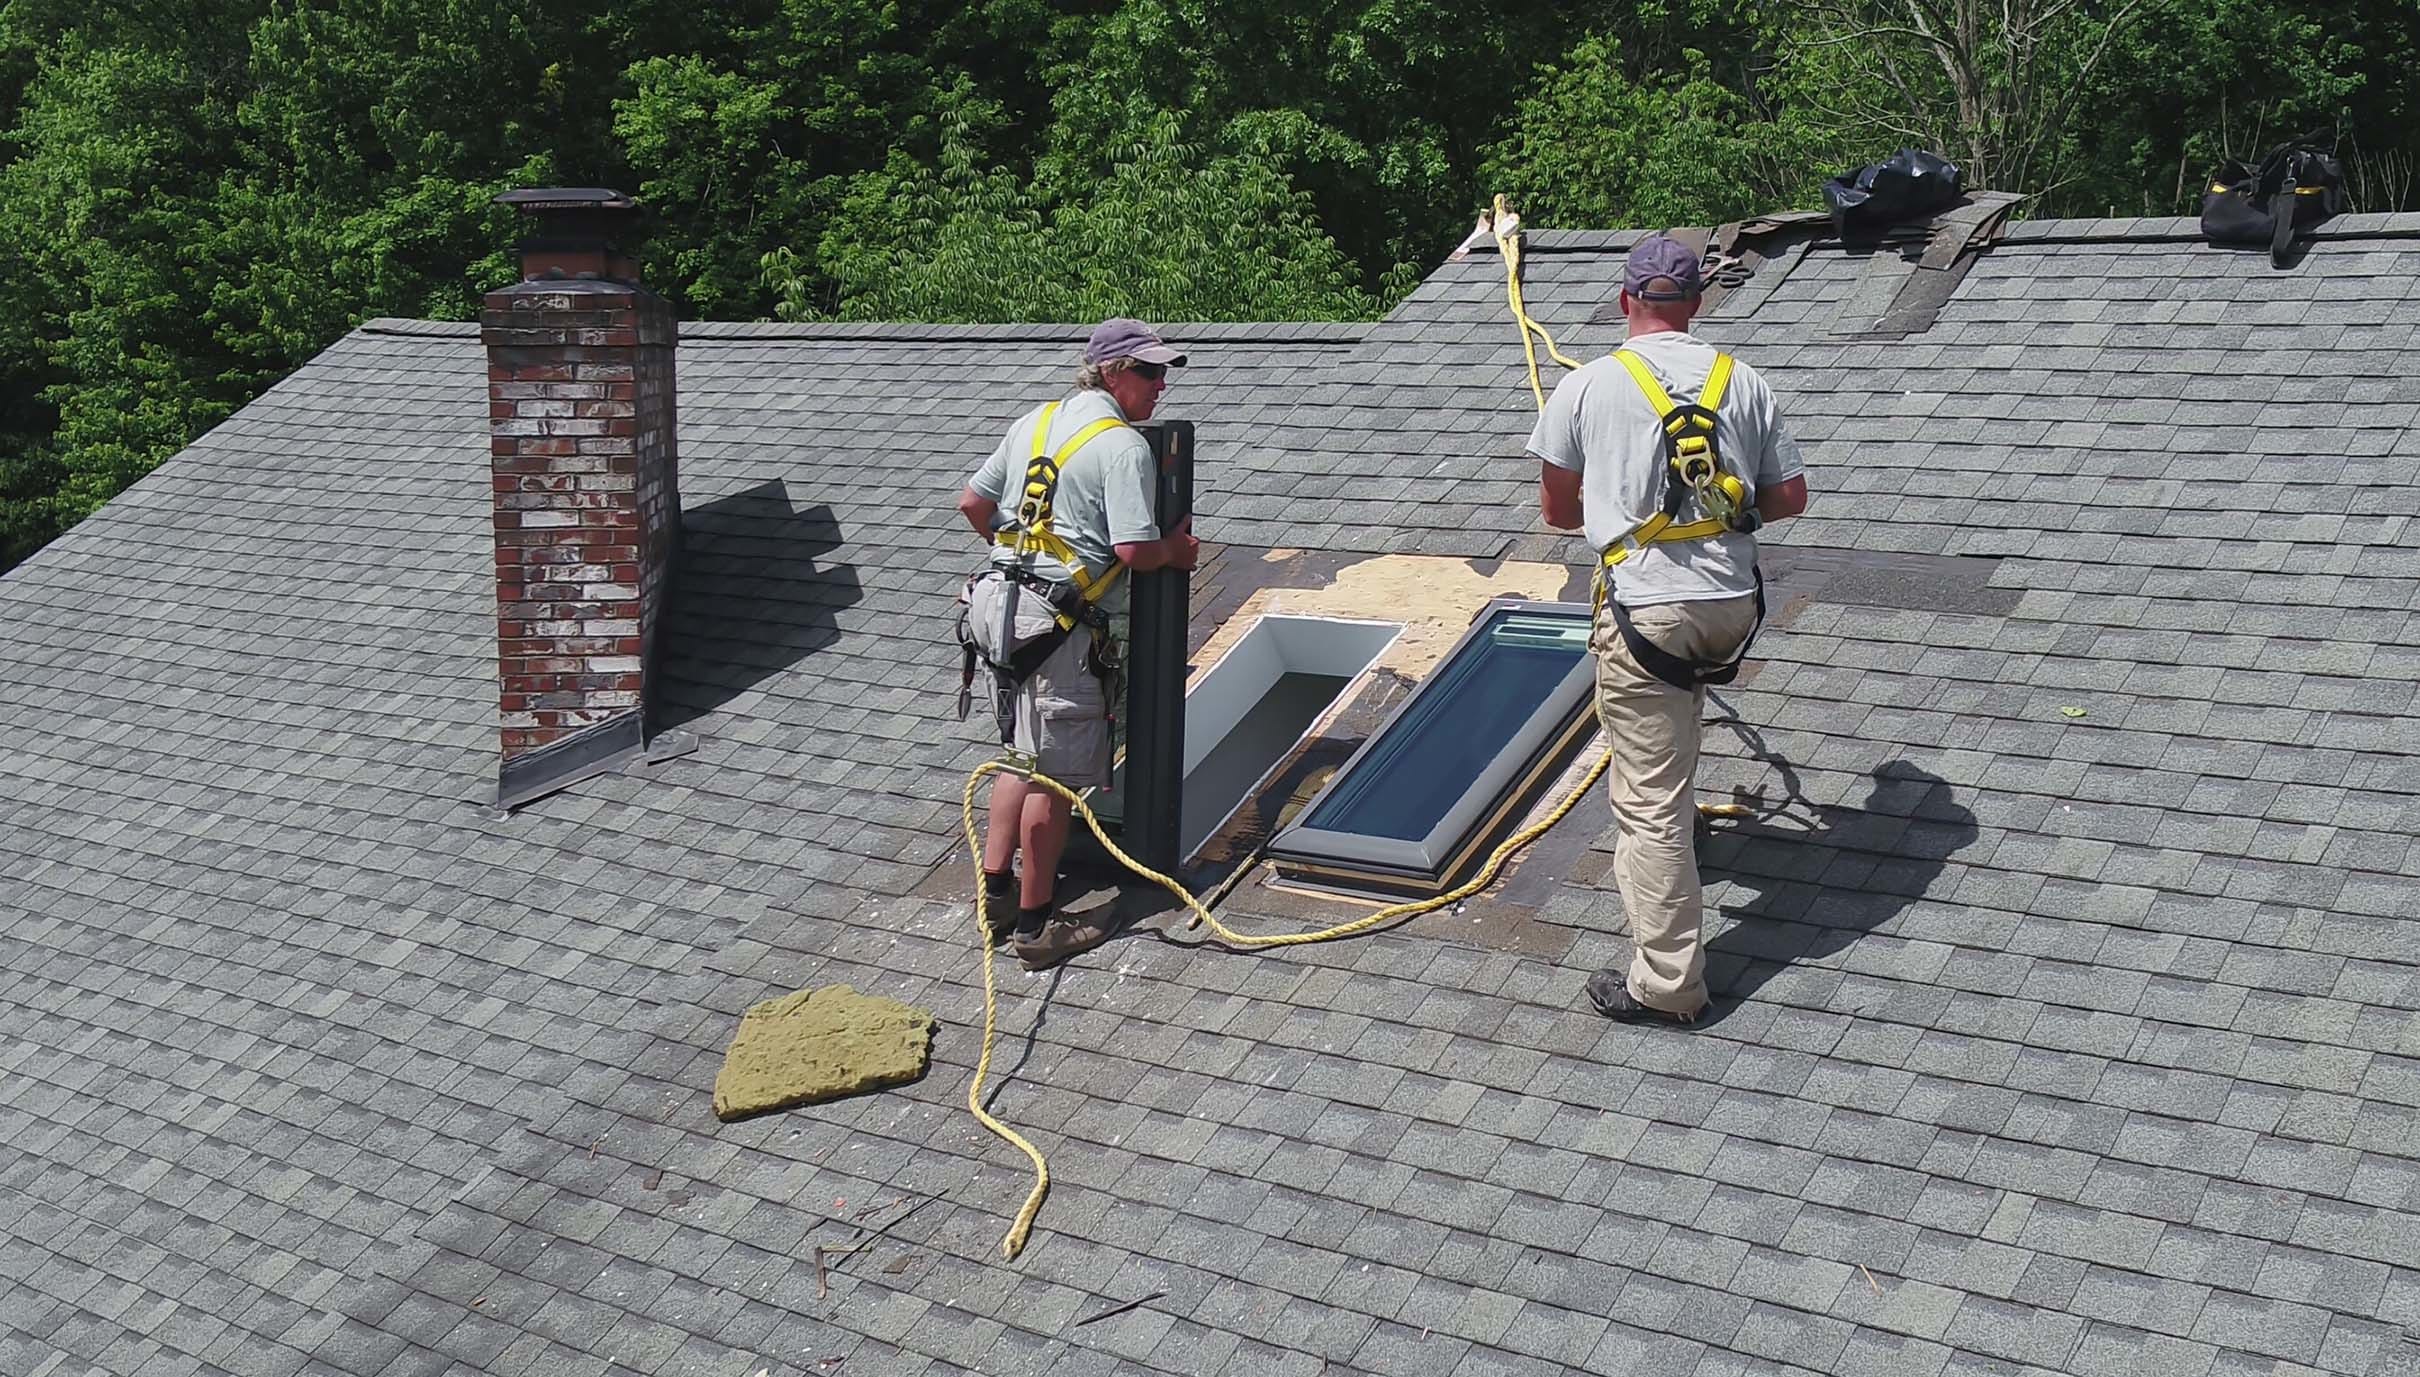 Skylight installers on a roof installing two skylights